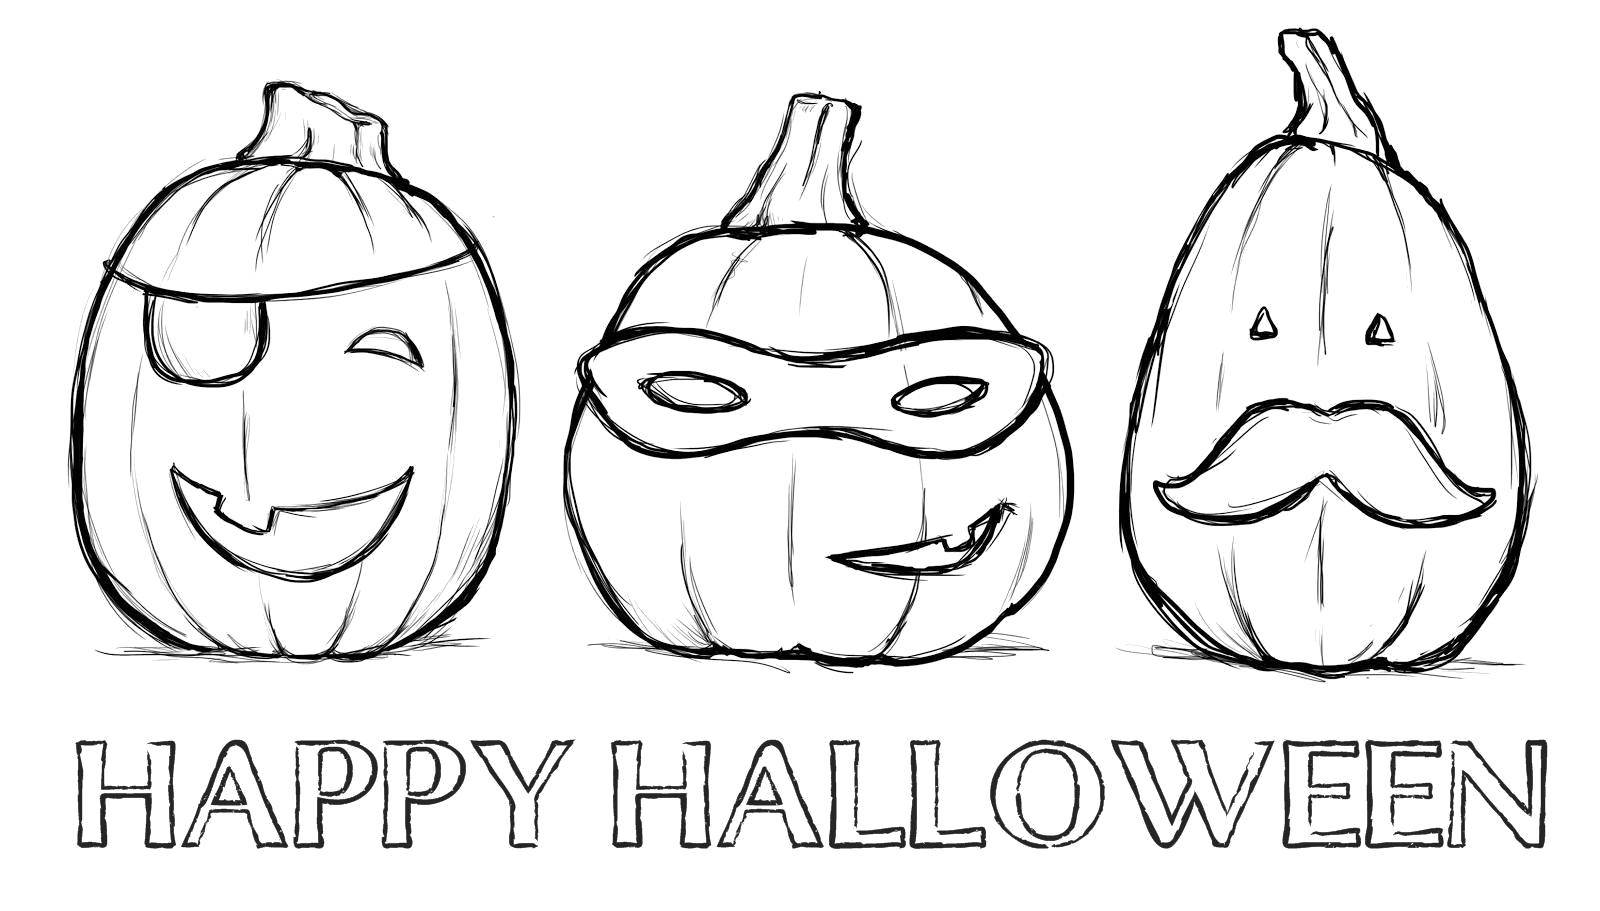 Coloring Happy Halloween. Category Halloween. Tags:  Halloween.